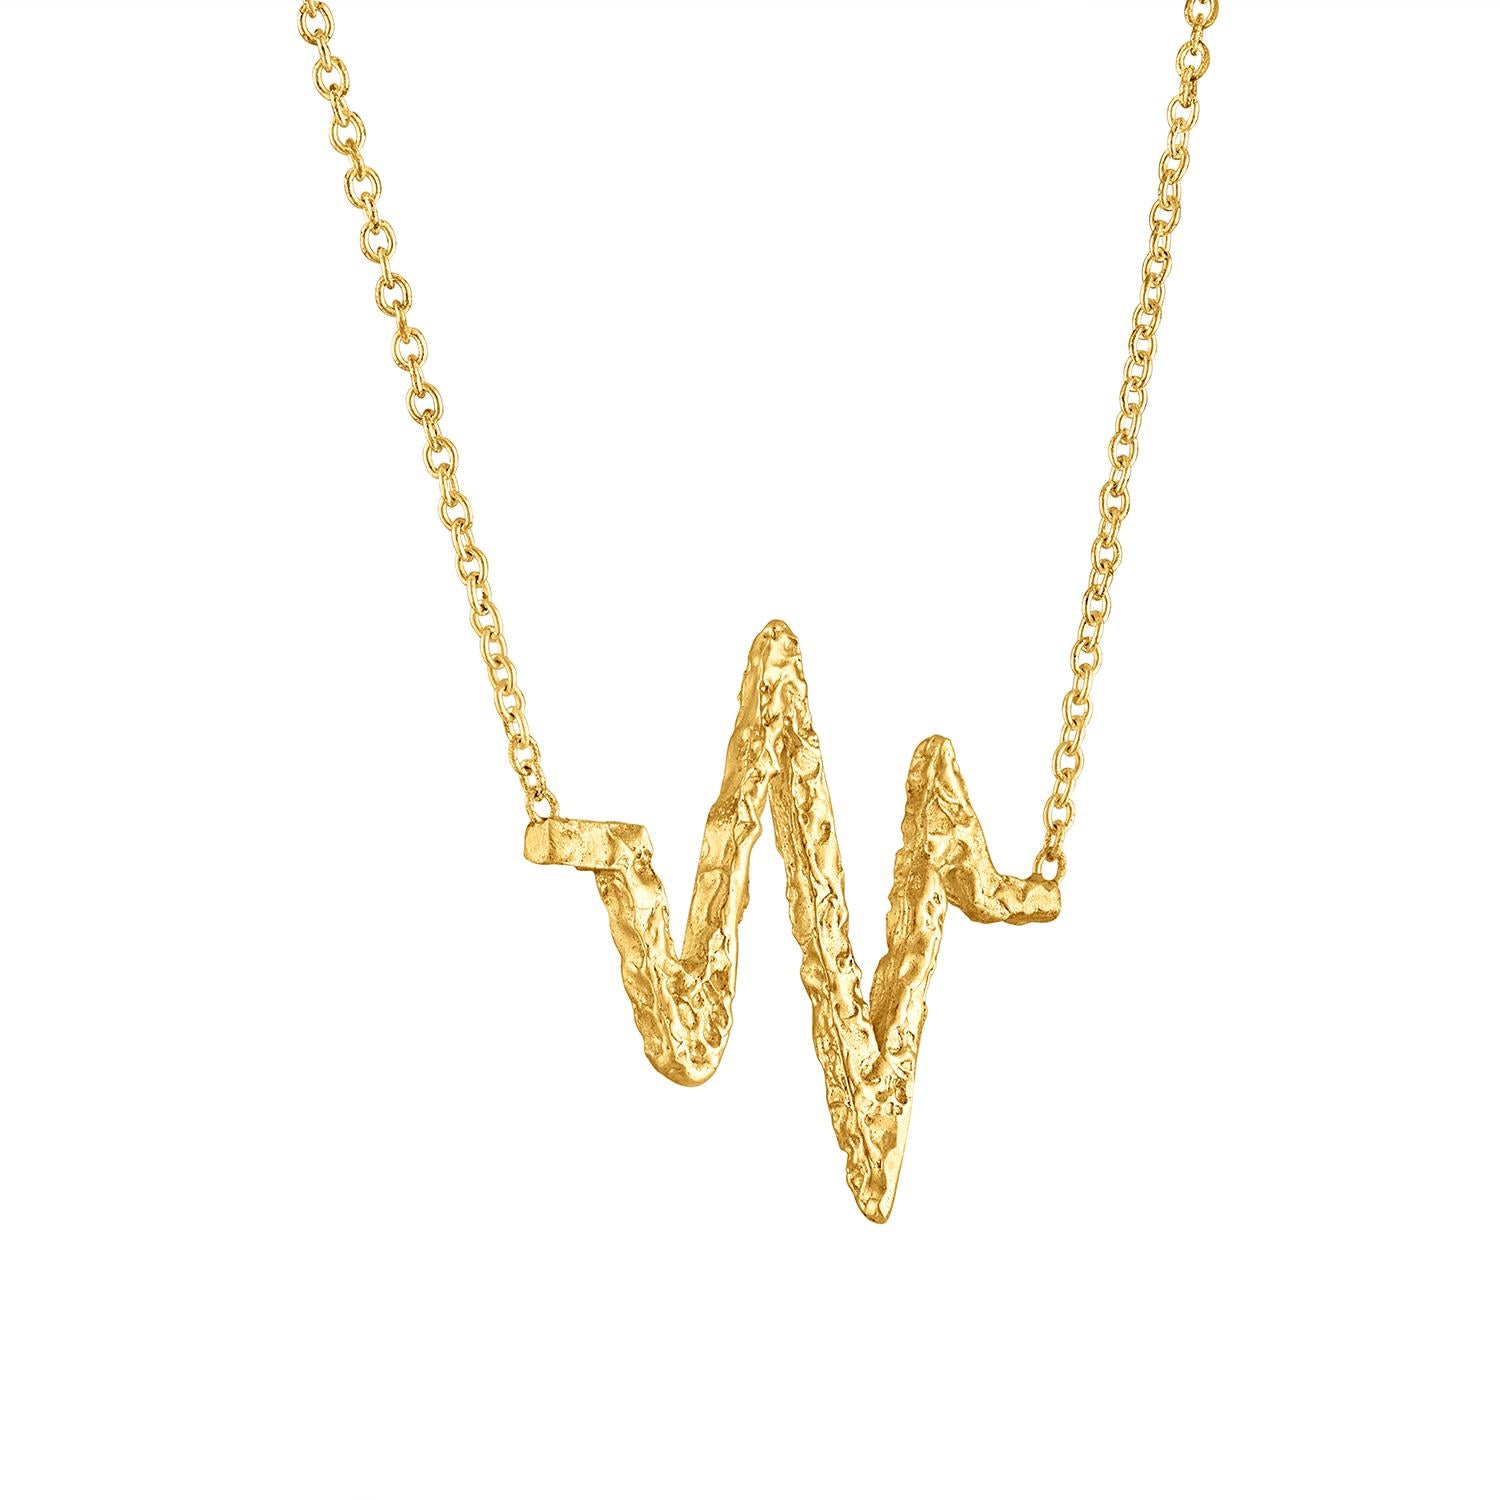 Artisan Frequency Symbol Necklace in 22k Gold, by Tagili For Sale